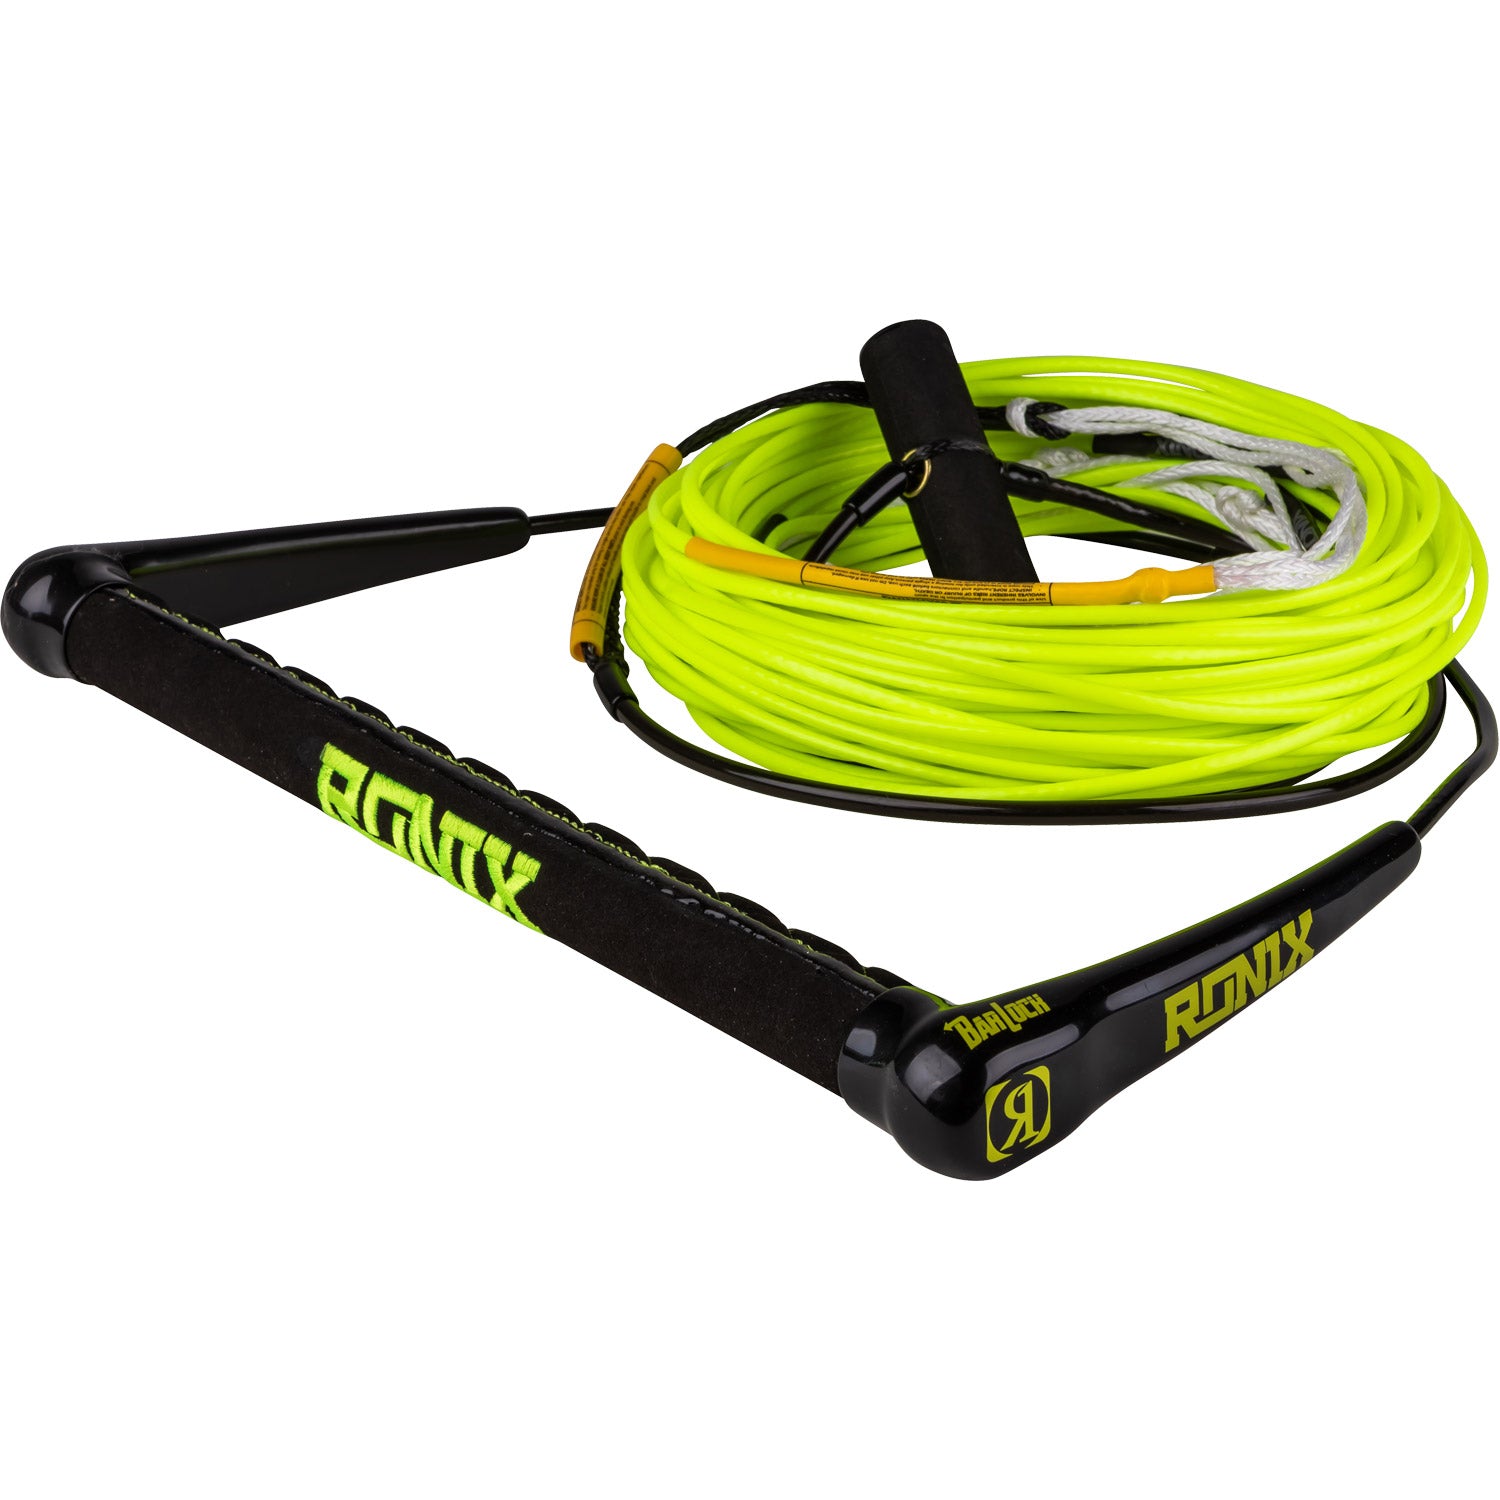 Combo 5.5 Wakeboard Rope Package